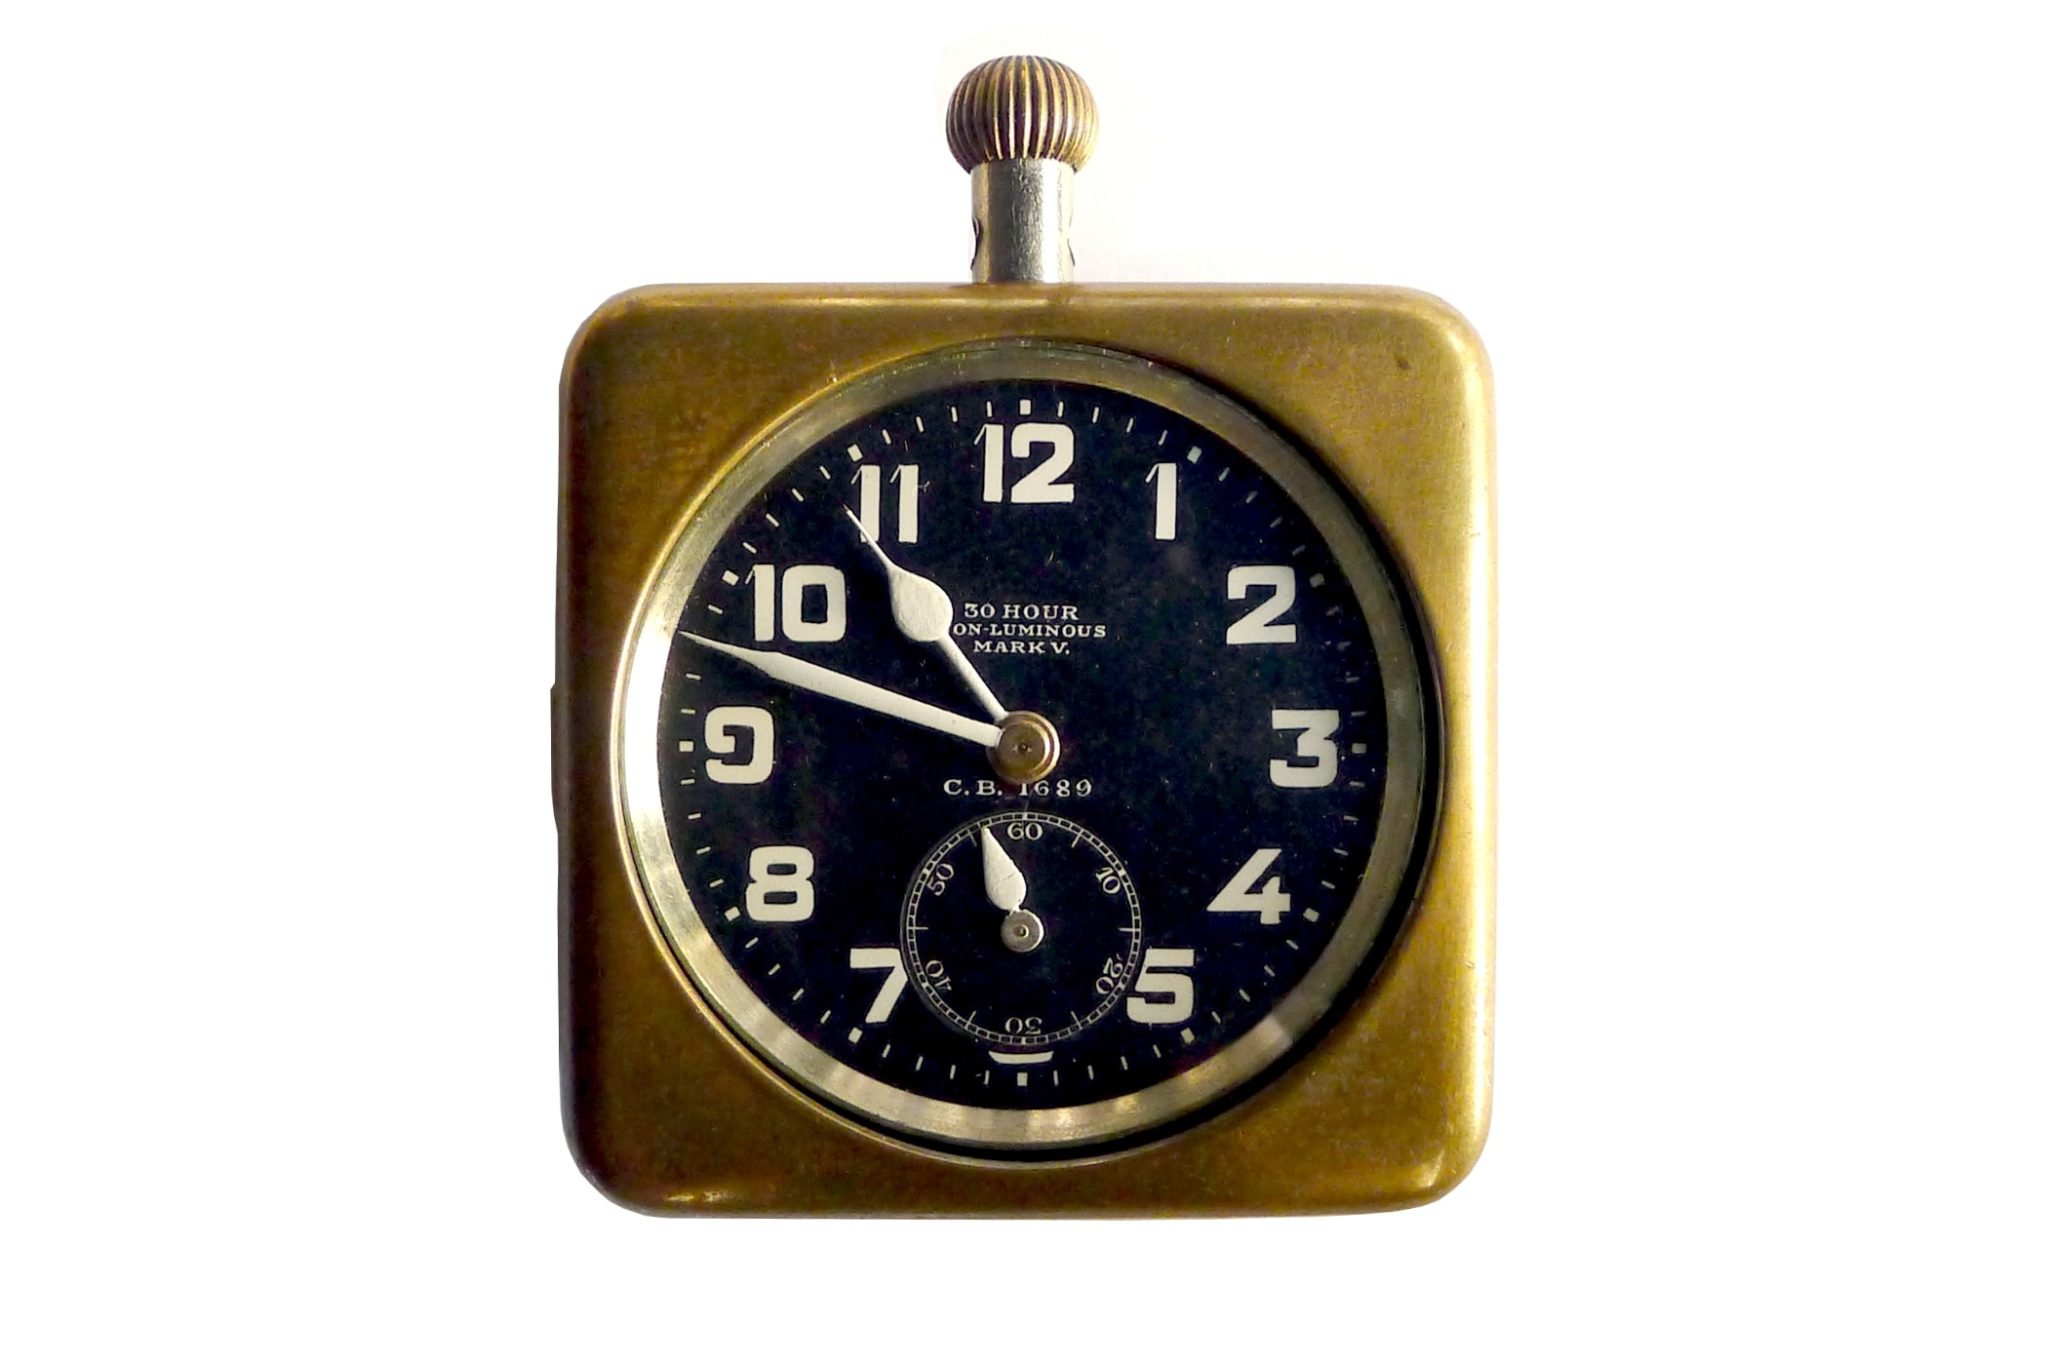 zenith-heritage-1916-1918-pilot-pocket-watch-used-by-the-royal-air-force